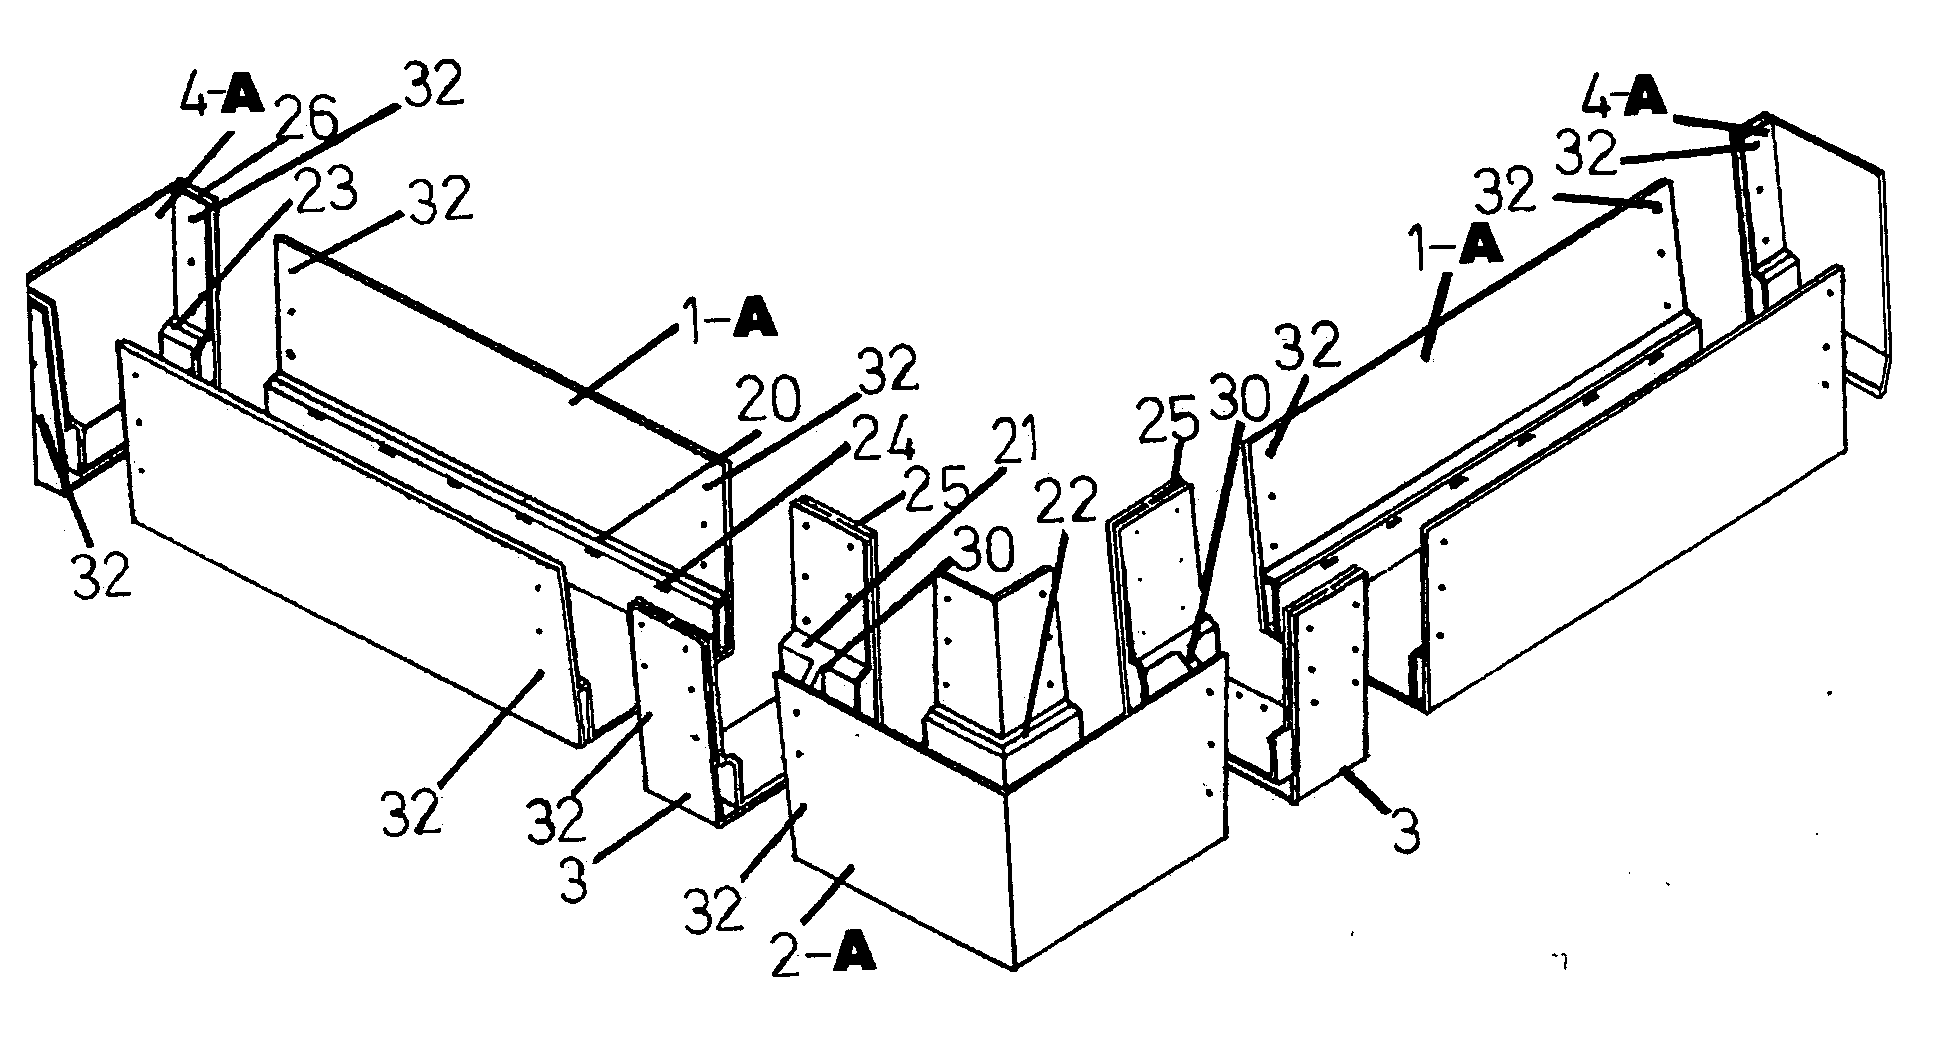 Modular flower box comprising wter drainage systemand clamp/support which is used to connect modules and which can house a lighting element